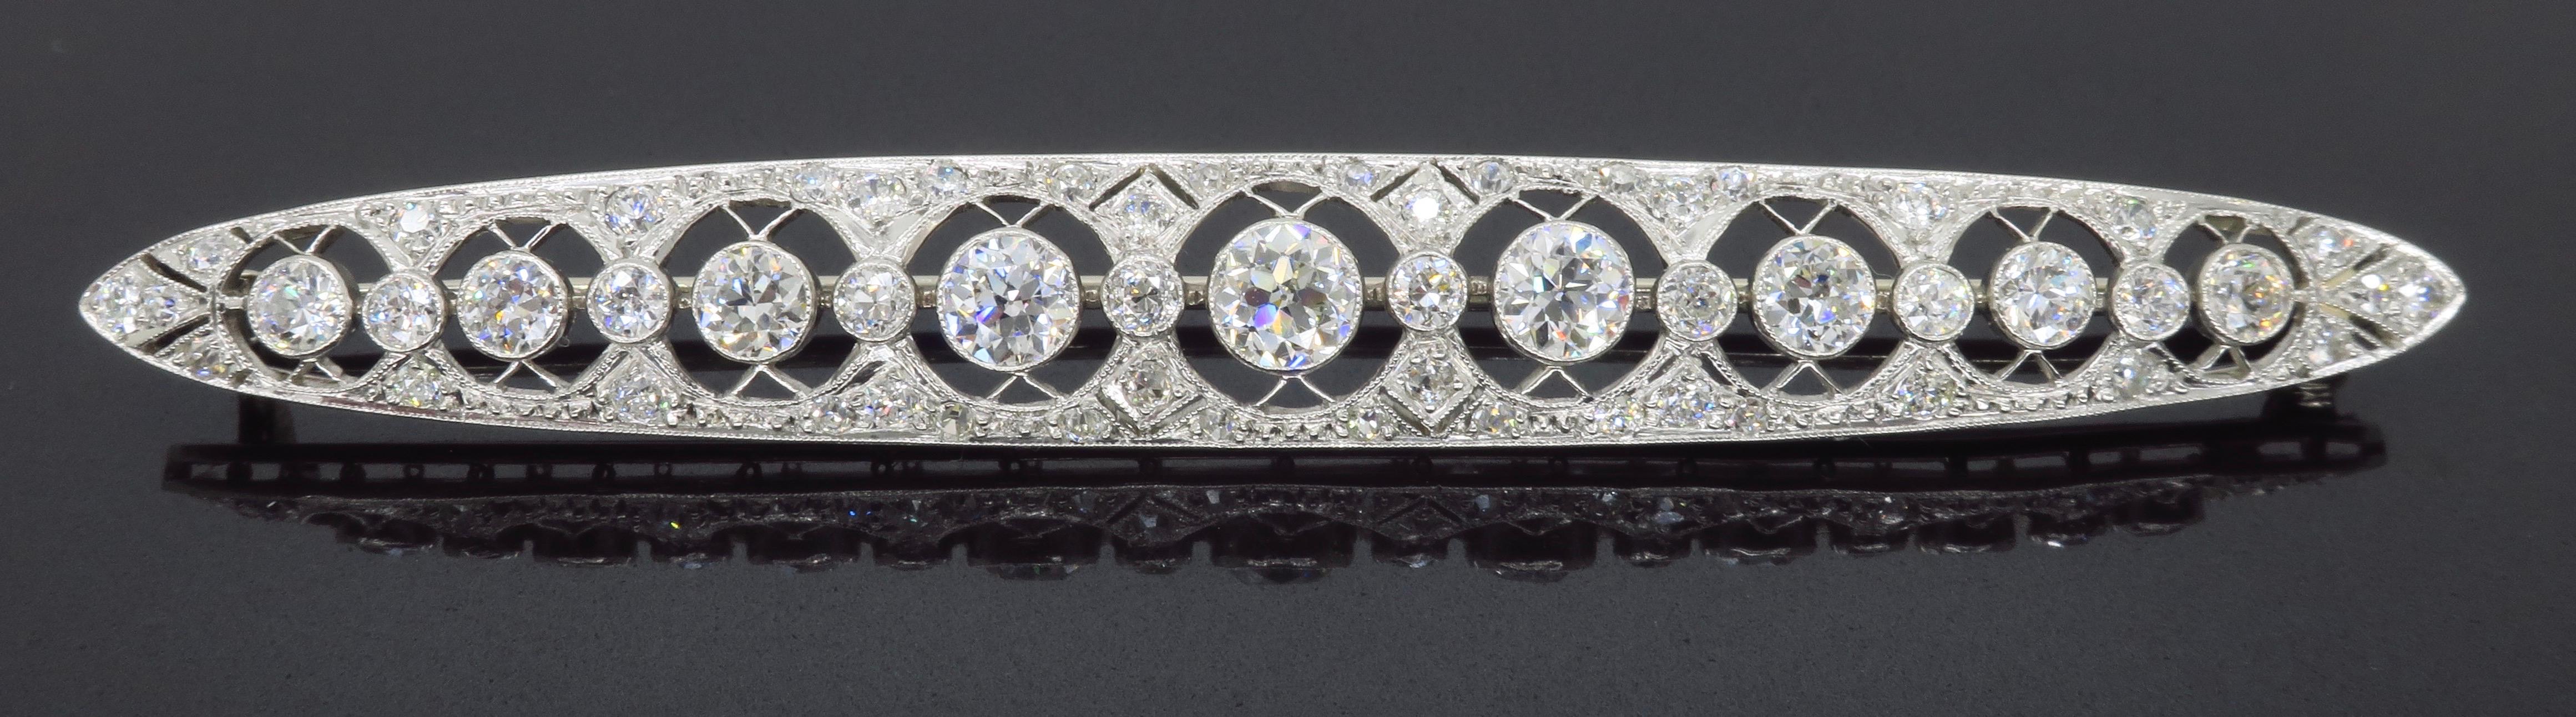 Stunning vintage diamond brooch perfectly crafted in Platinum with 4.85ctw of Old European cut diamonds. 

Diamond Carat Weight: Approximately 4.85CTW
Diamond Cut: Old European Cut Diamonds
Color: Average E-H
Clarity: Average VS
Metal: Platinum